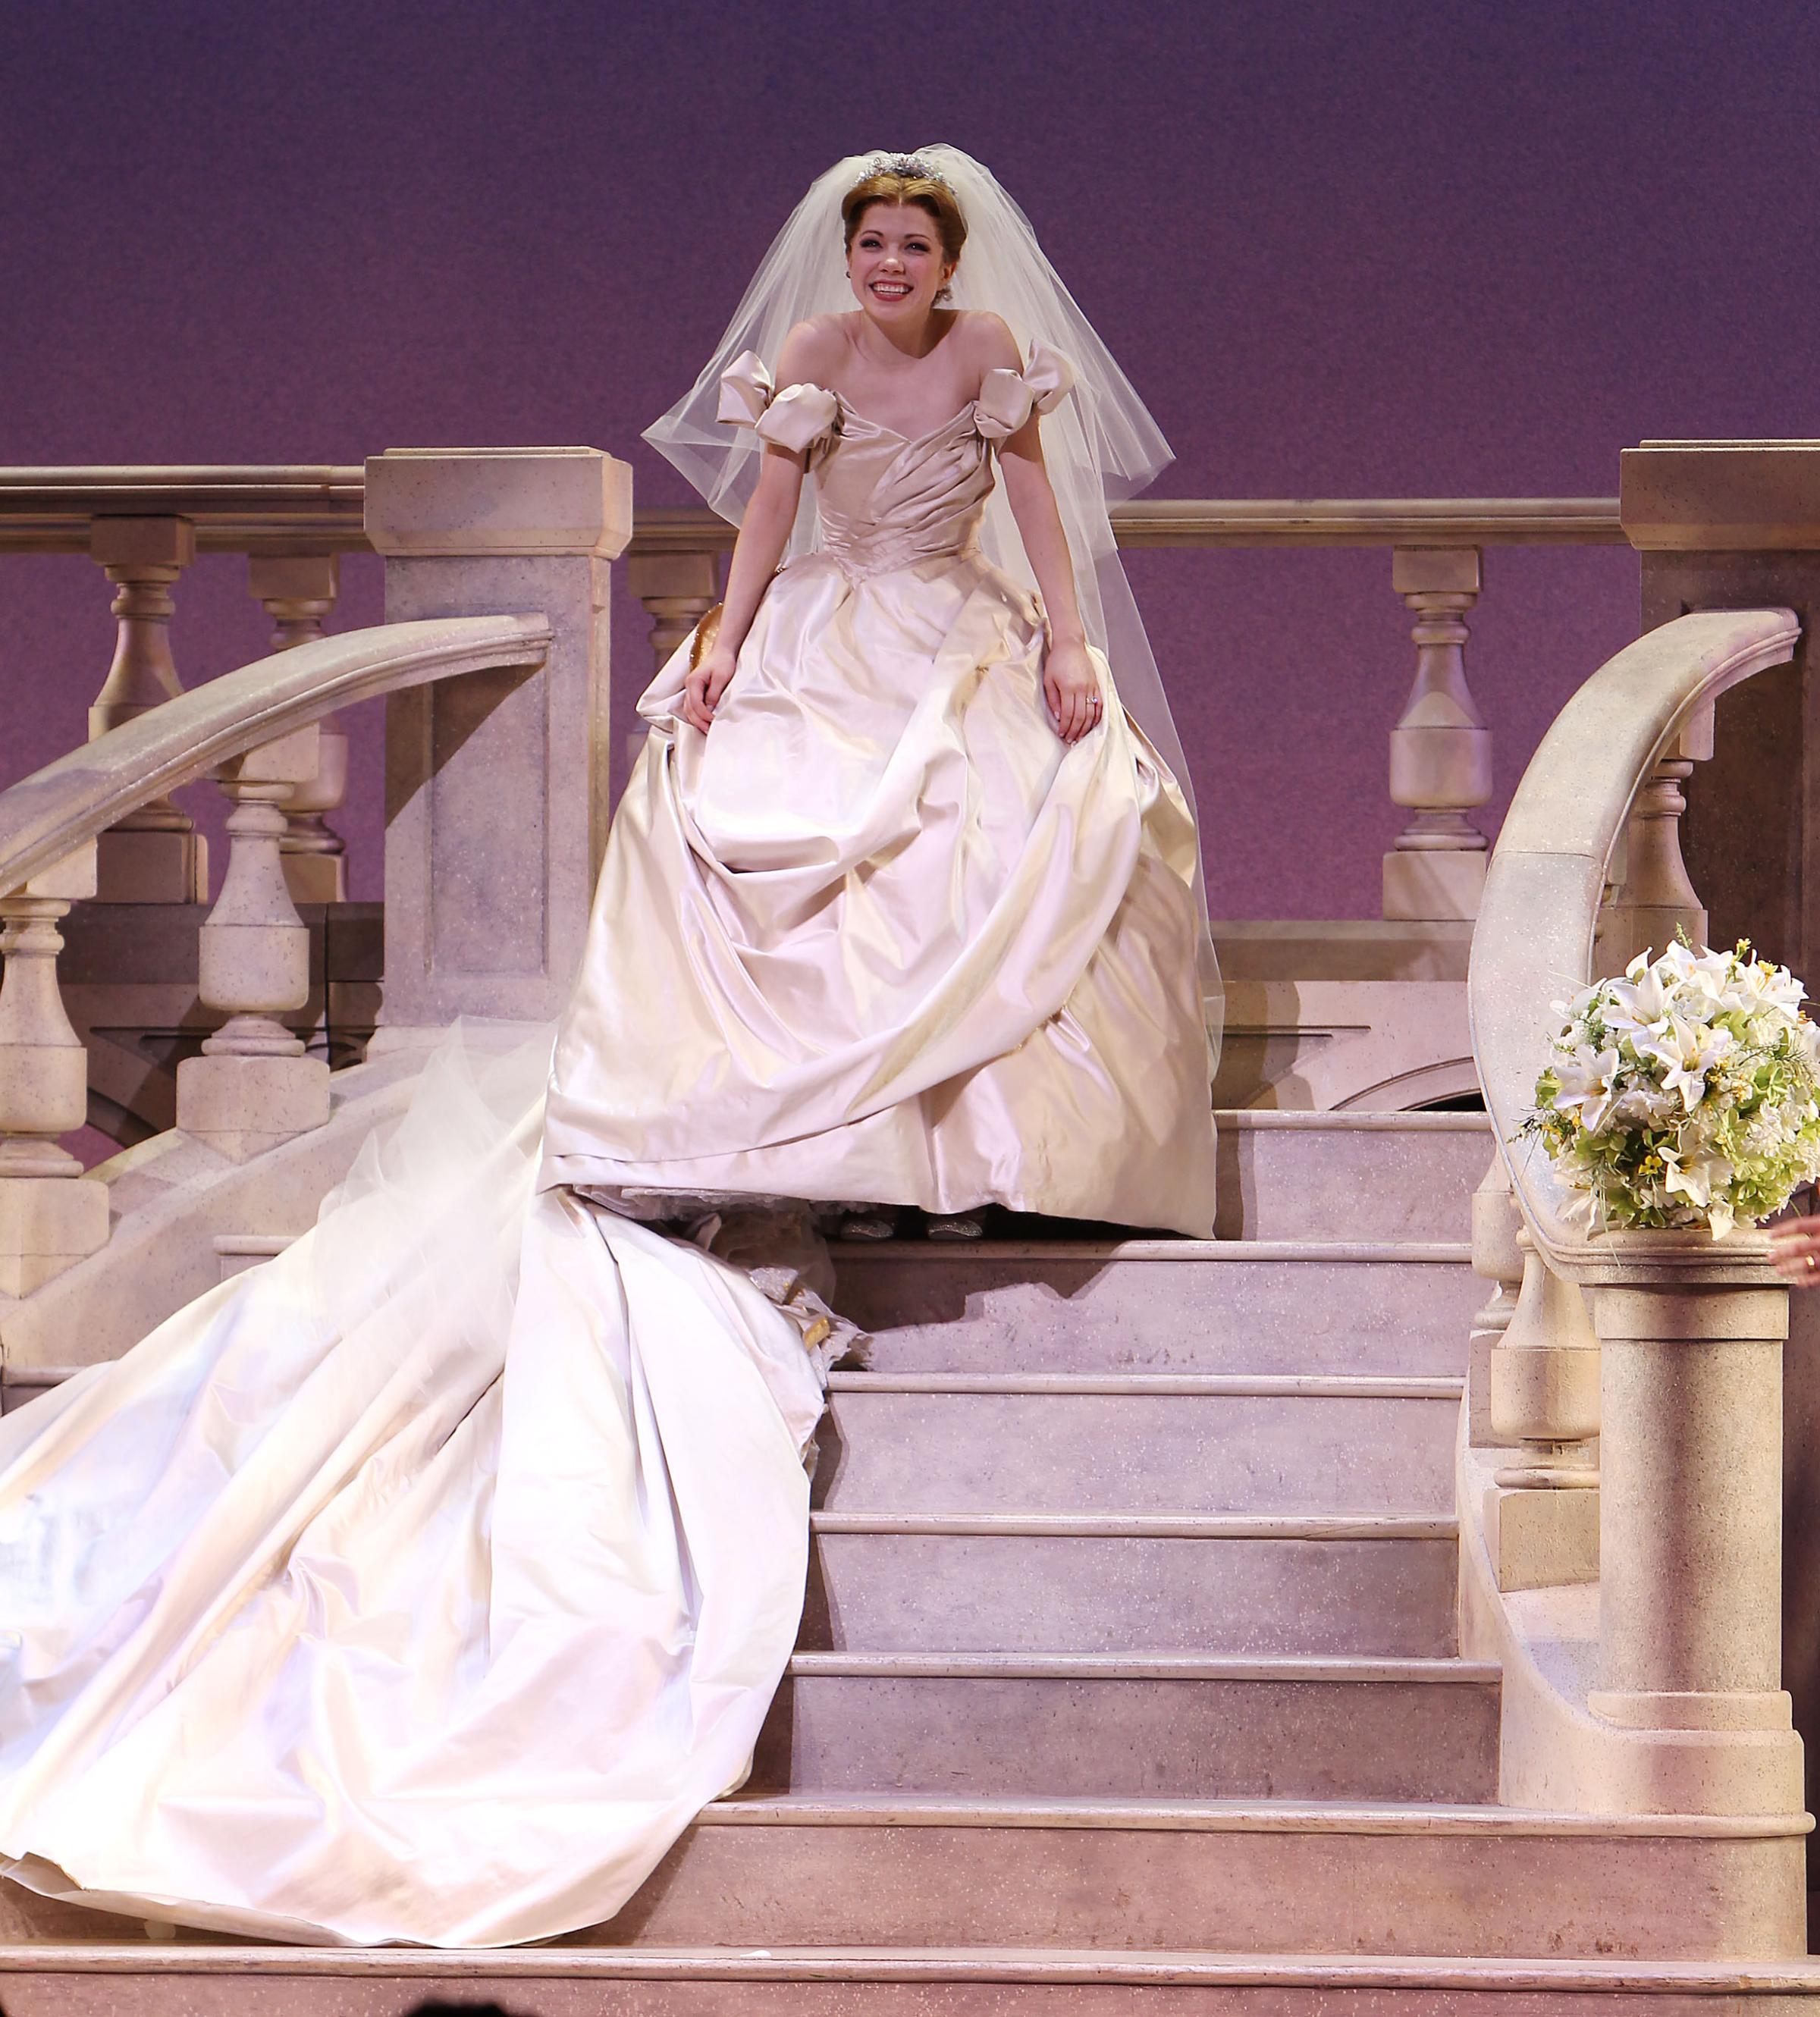 Curtain Call for "CINDERELLA" on Broadway Starring Carly Rae Jepsen and Fran Drescher